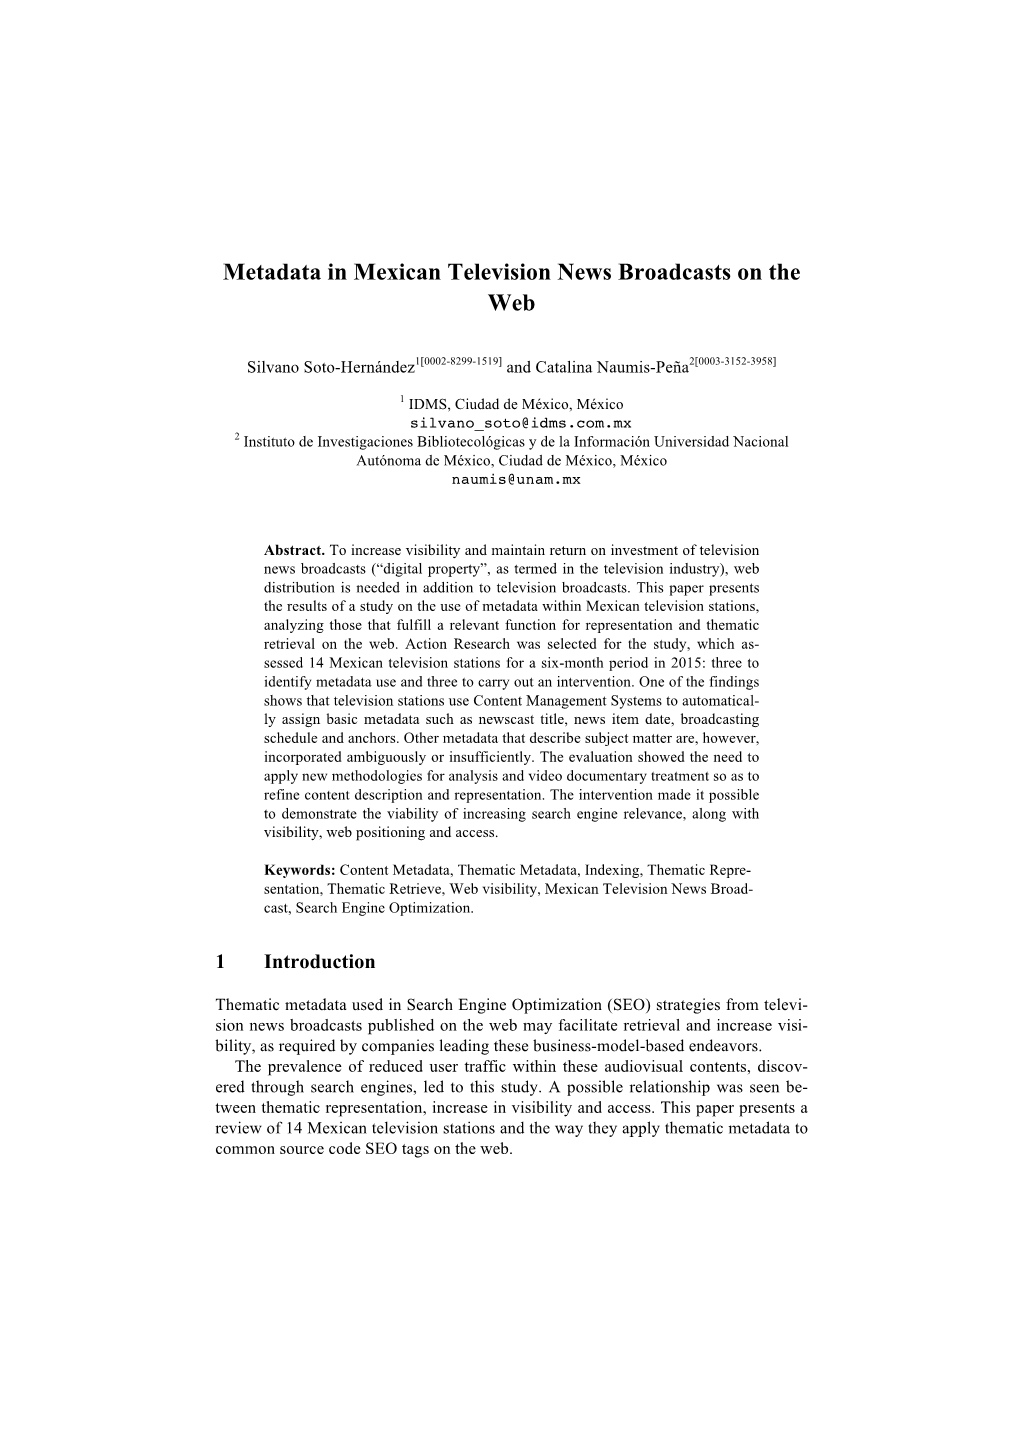 Metadata in Mexican Television News Broadcasts on the Web